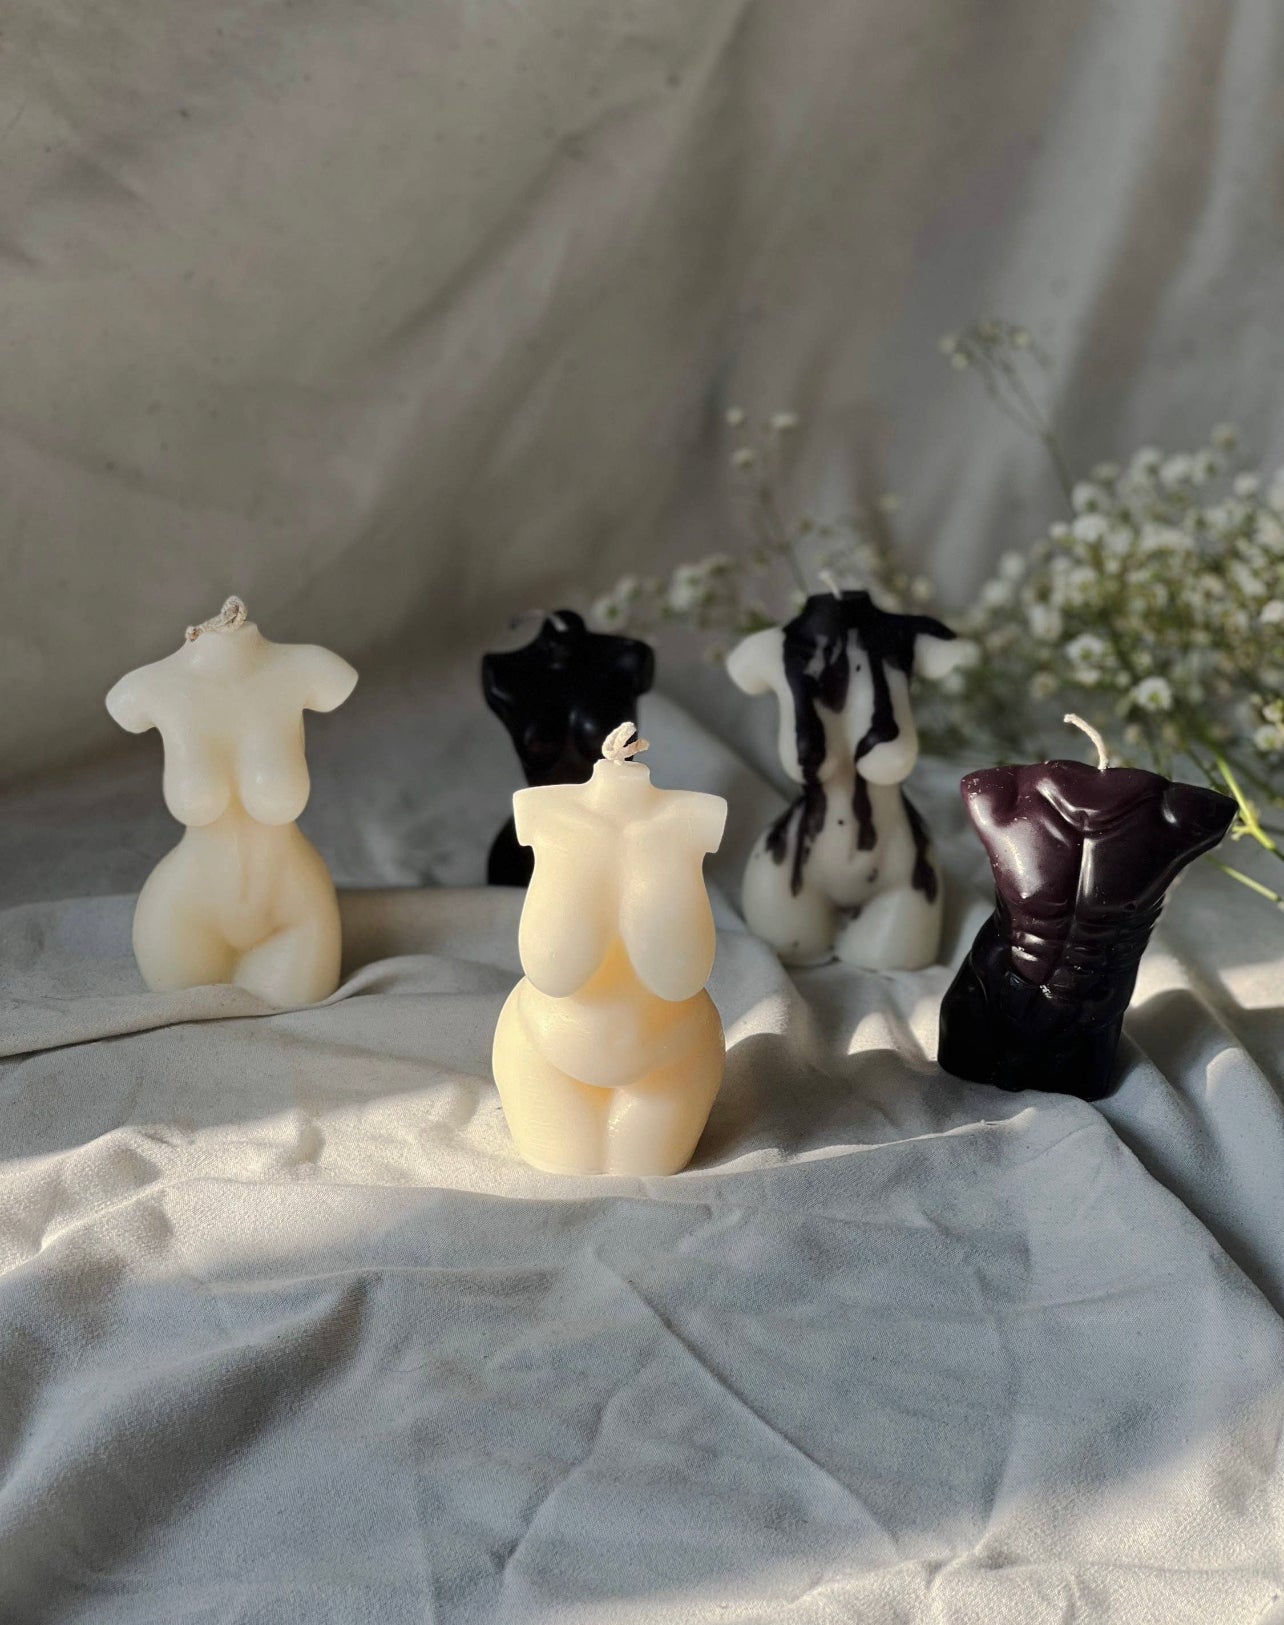 Female body candle, Valentine’s gift ,home decor,gift